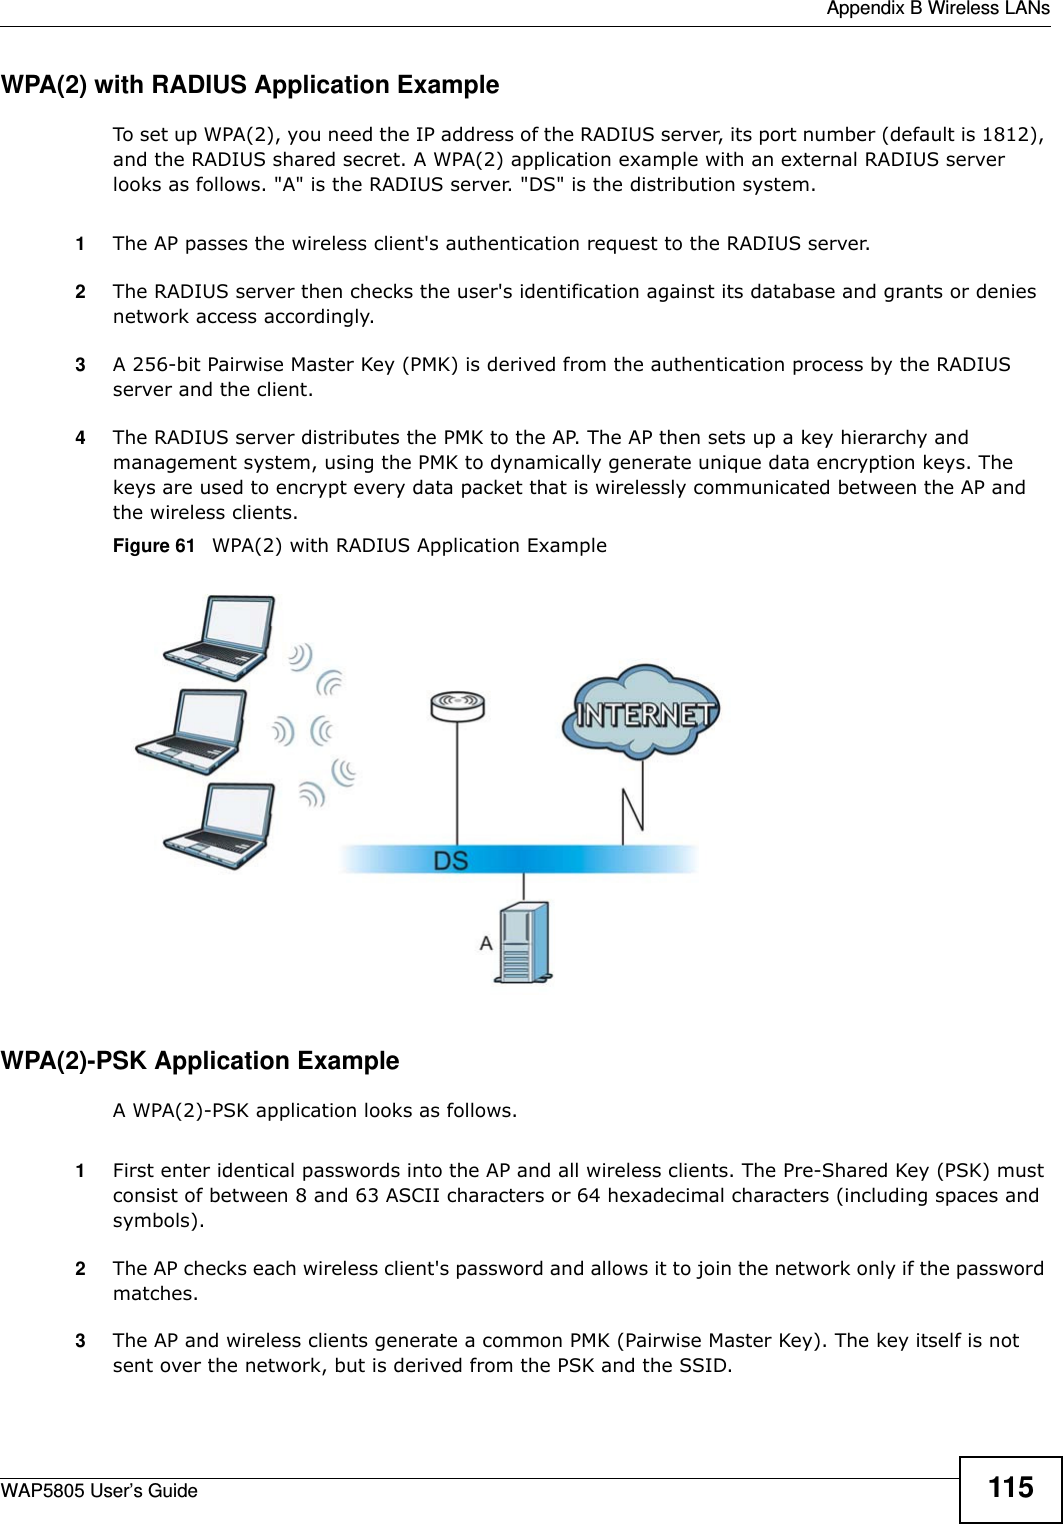  Appendix B Wireless LANsWAP5805 User’s Guide 115WPA(2) with RADIUS Application ExampleTo set up WPA(2), you need the IP address of the RADIUS server, its port number (default is 1812), and the RADIUS shared secret. A WPA(2) application example with an external RADIUS server looks as follows. &quot;A&quot; is the RADIUS server. &quot;DS&quot; is the distribution system.1The AP passes the wireless client&apos;s authentication request to the RADIUS server.2The RADIUS server then checks the user&apos;s identification against its database and grants or denies network access accordingly.3A 256-bit Pairwise Master Key (PMK) is derived from the authentication process by the RADIUS server and the client.4The RADIUS server distributes the PMK to the AP. The AP then sets up a key hierarchy and management system, using the PMK to dynamically generate unique data encryption keys. The keys are used to encrypt every data packet that is wirelessly communicated between the AP and the wireless clients.Figure 61   WPA(2) with RADIUS Application ExampleWPA(2)-PSK Application ExampleA WPA(2)-PSK application looks as follows.1First enter identical passwords into the AP and all wireless clients. The Pre-Shared Key (PSK) must consist of between 8 and 63 ASCII characters or 64 hexadecimal characters (including spaces and symbols).2The AP checks each wireless client&apos;s password and allows it to join the network only if the password matches.3The AP and wireless clients generate a common PMK (Pairwise Master Key). The key itself is not sent over the network, but is derived from the PSK and the SSID. 